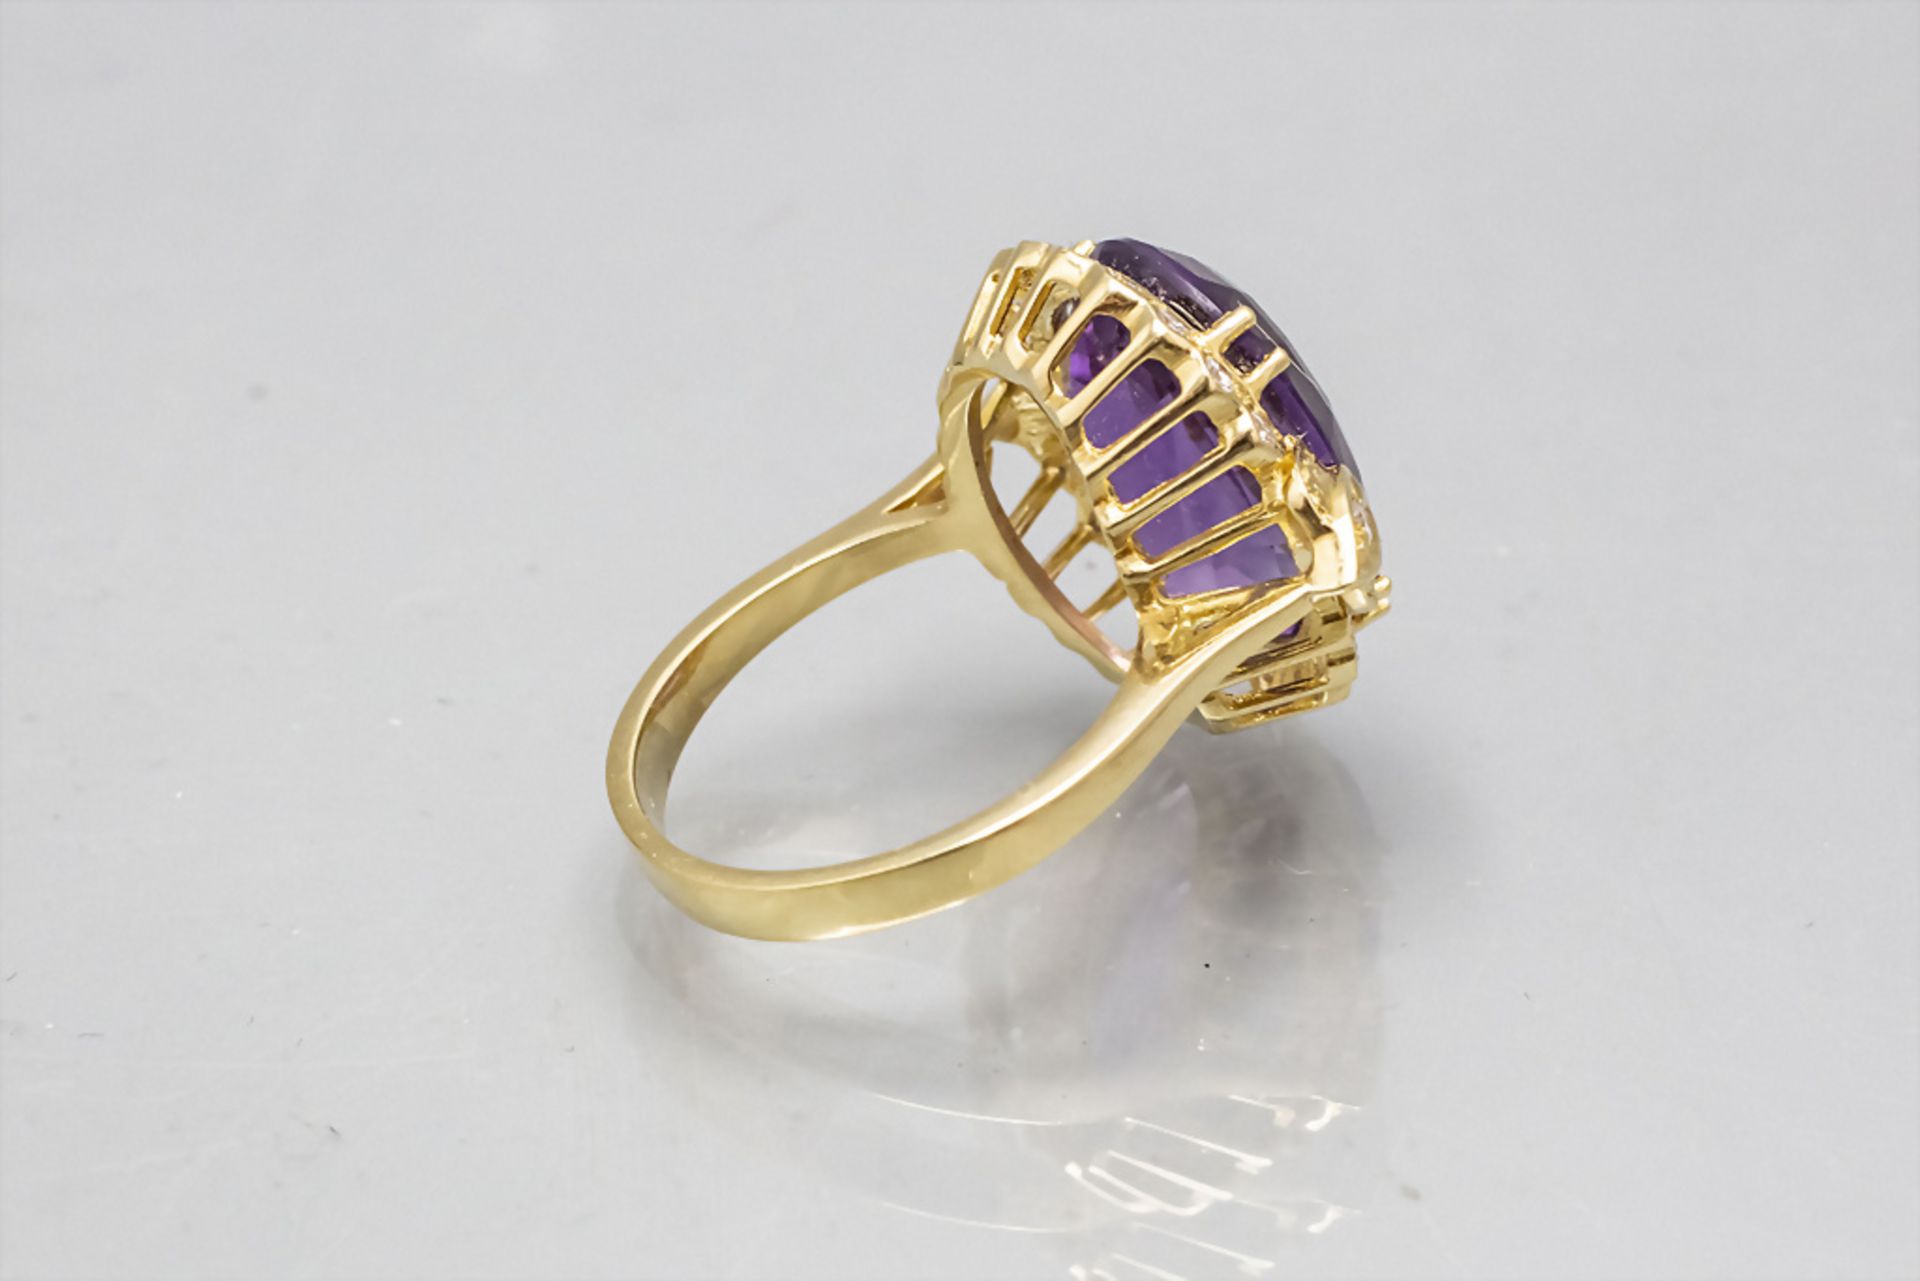 Damenring mit Amethyst und Diamanten / A ladies 18 ct gold ring with diamonds and amethyst - Image 2 of 2